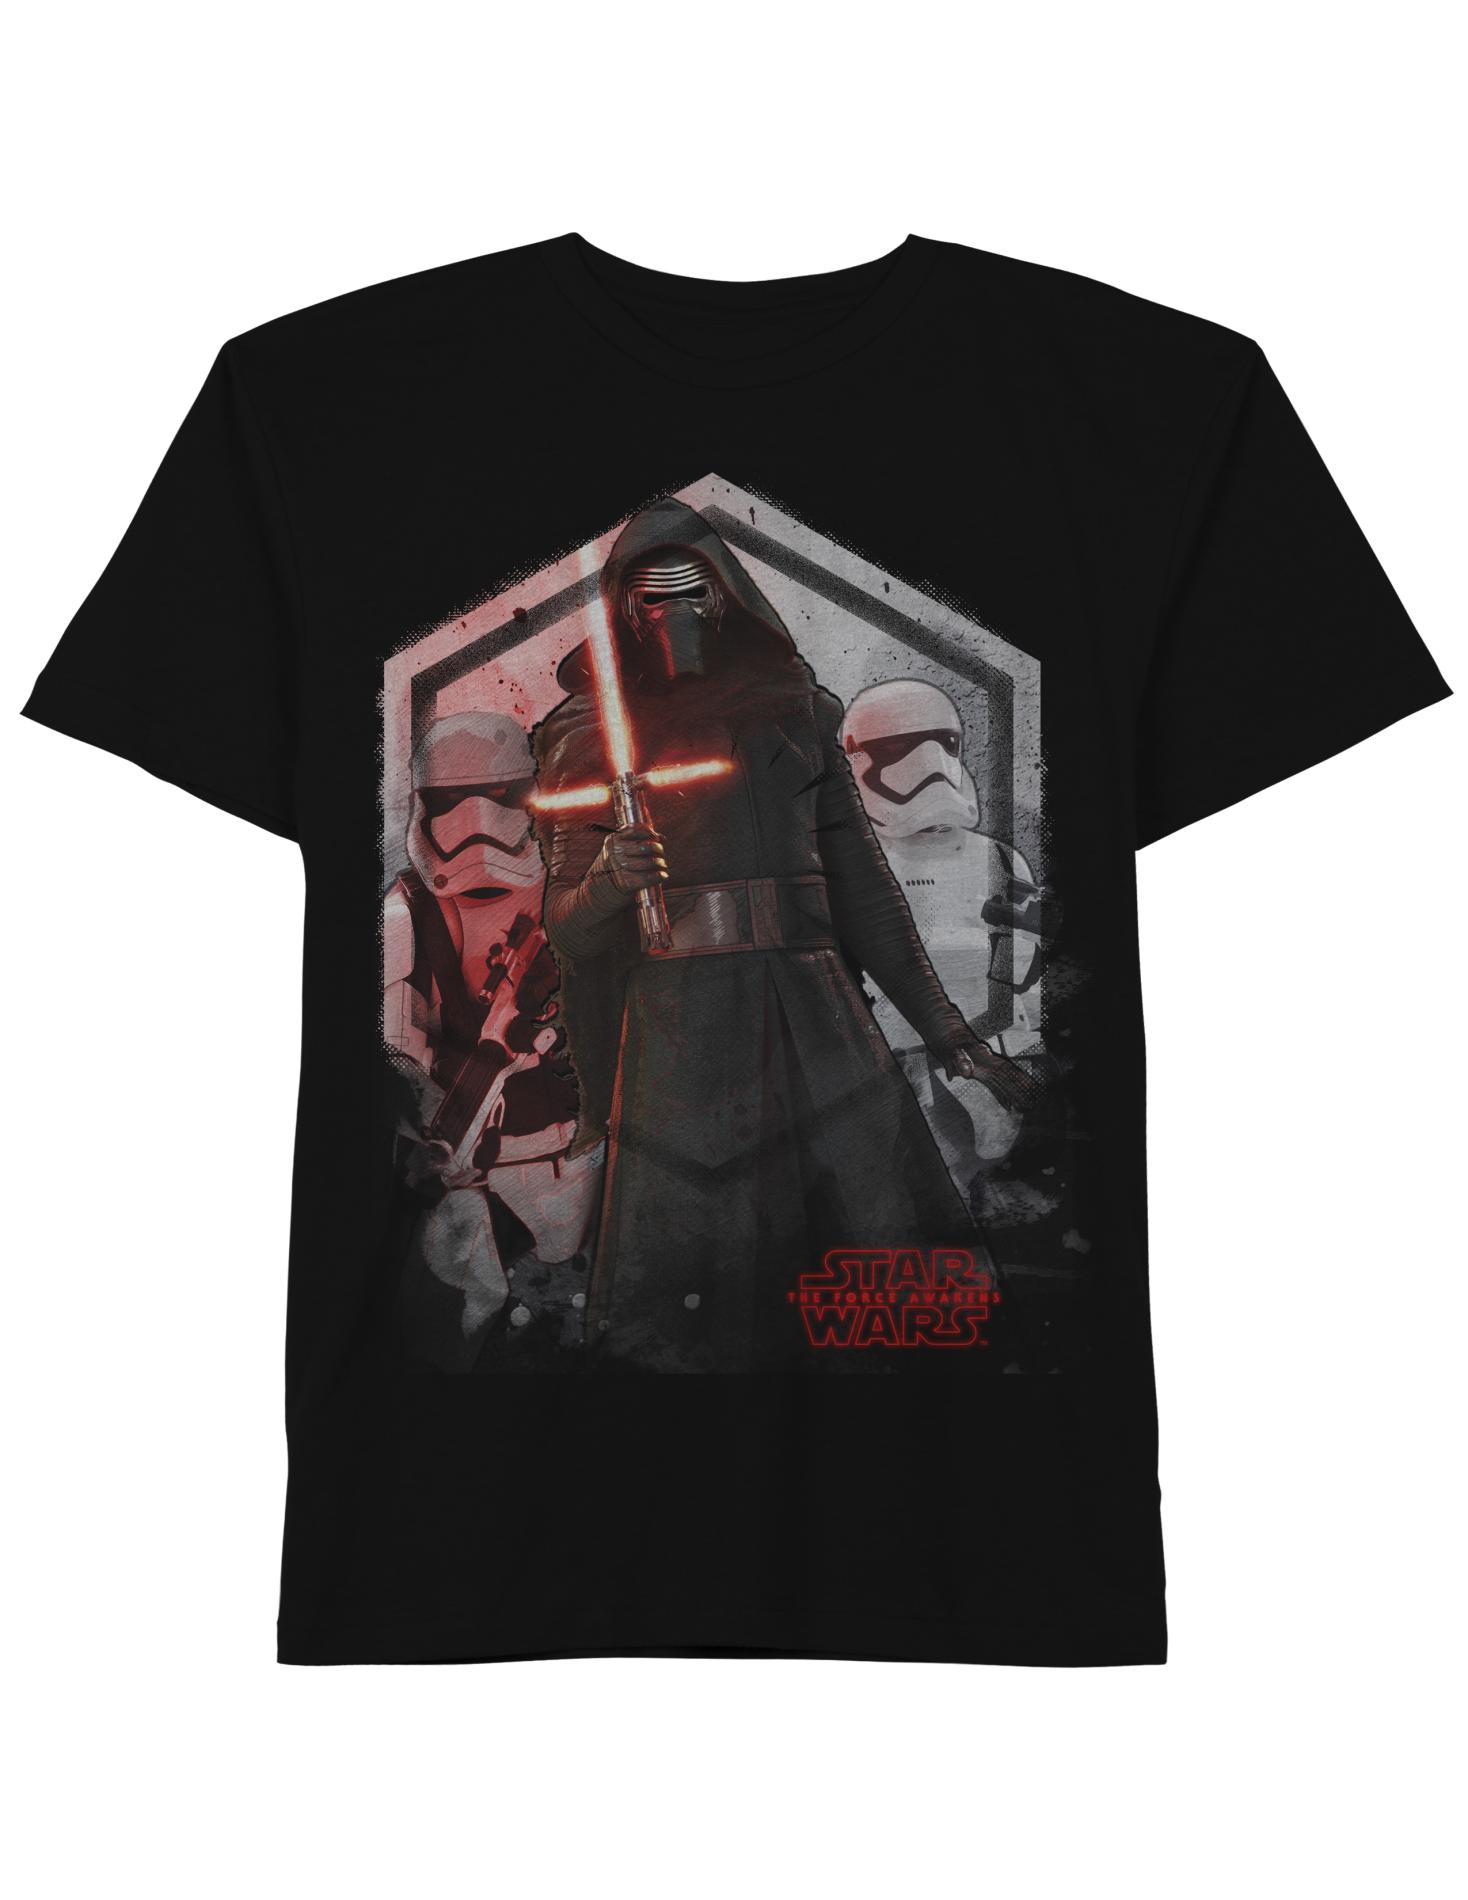 Star Wars Boy's Graphic T-Shirt - The Force Awakens